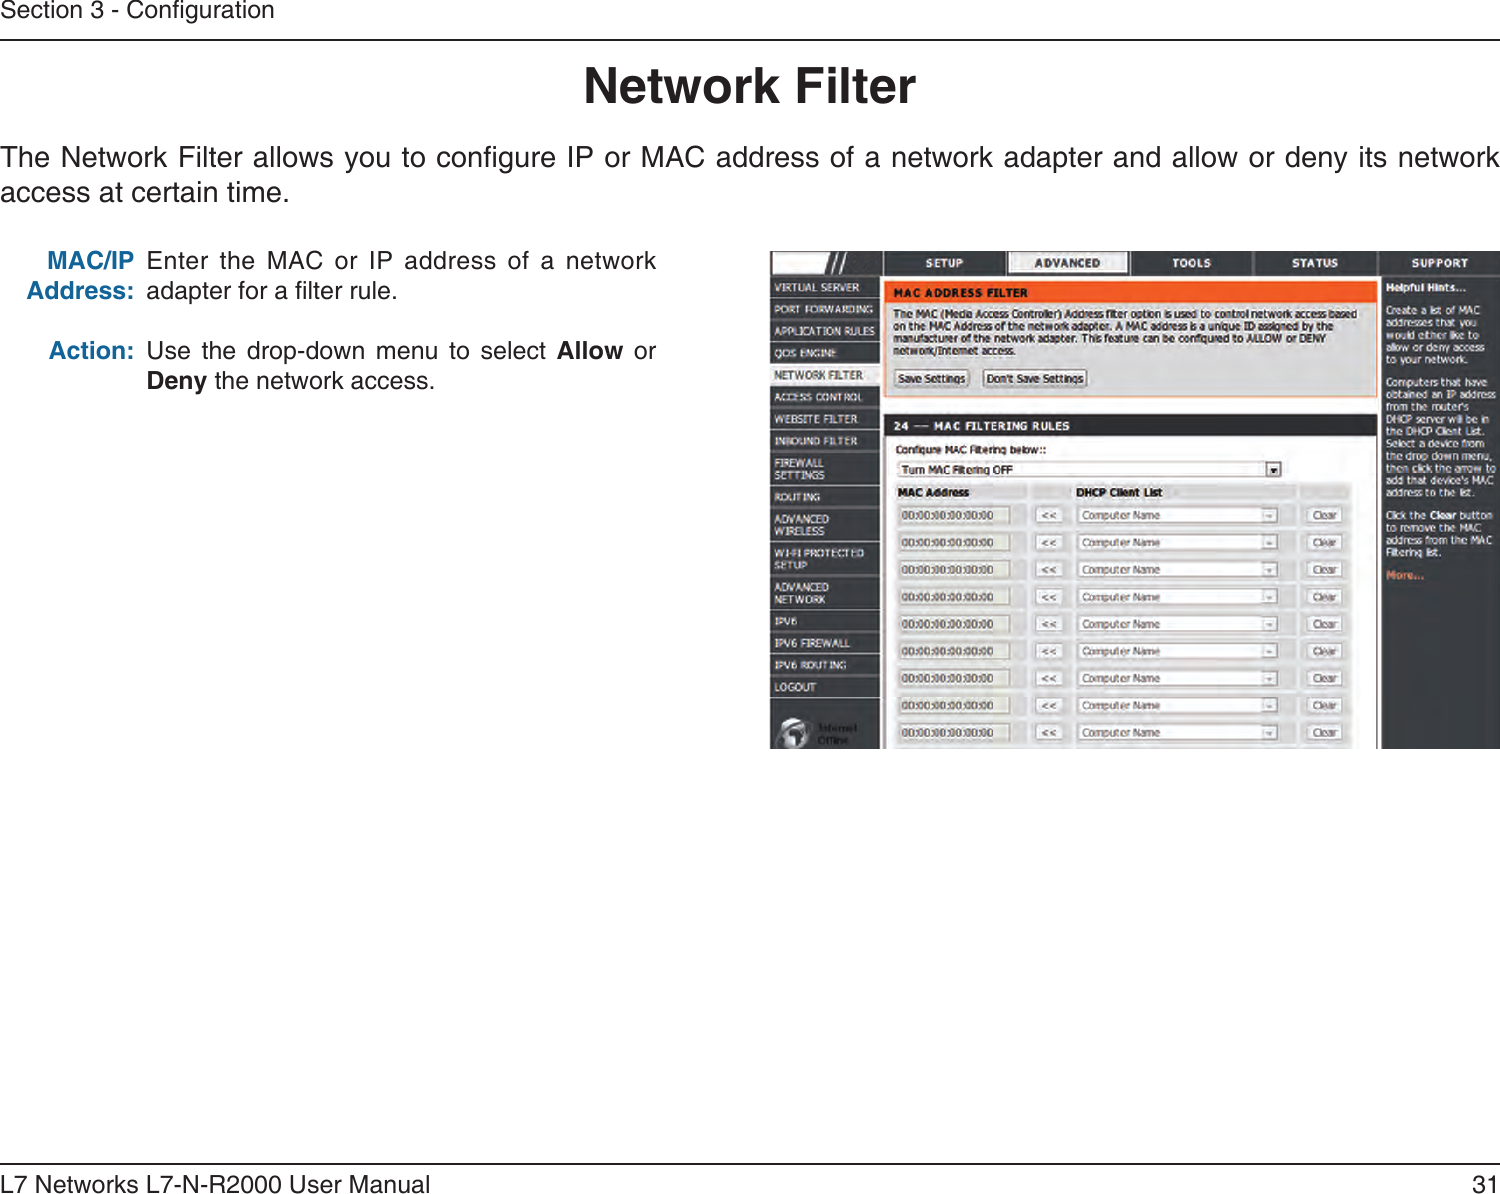 31L7 Networks L7-N-R2000 User ManualSection 3 - CongurationEnter  the  MAC  or  IP  address  of  a  network adapter for a lter rule.Use  the  drop-down  menu  to  select  Allow  or Deny the network access.MAC/IP Address:Action:The Network Filter allows you to congure IP or MAC address of a network adapter and allow or deny its network access at certain time.Network Filter